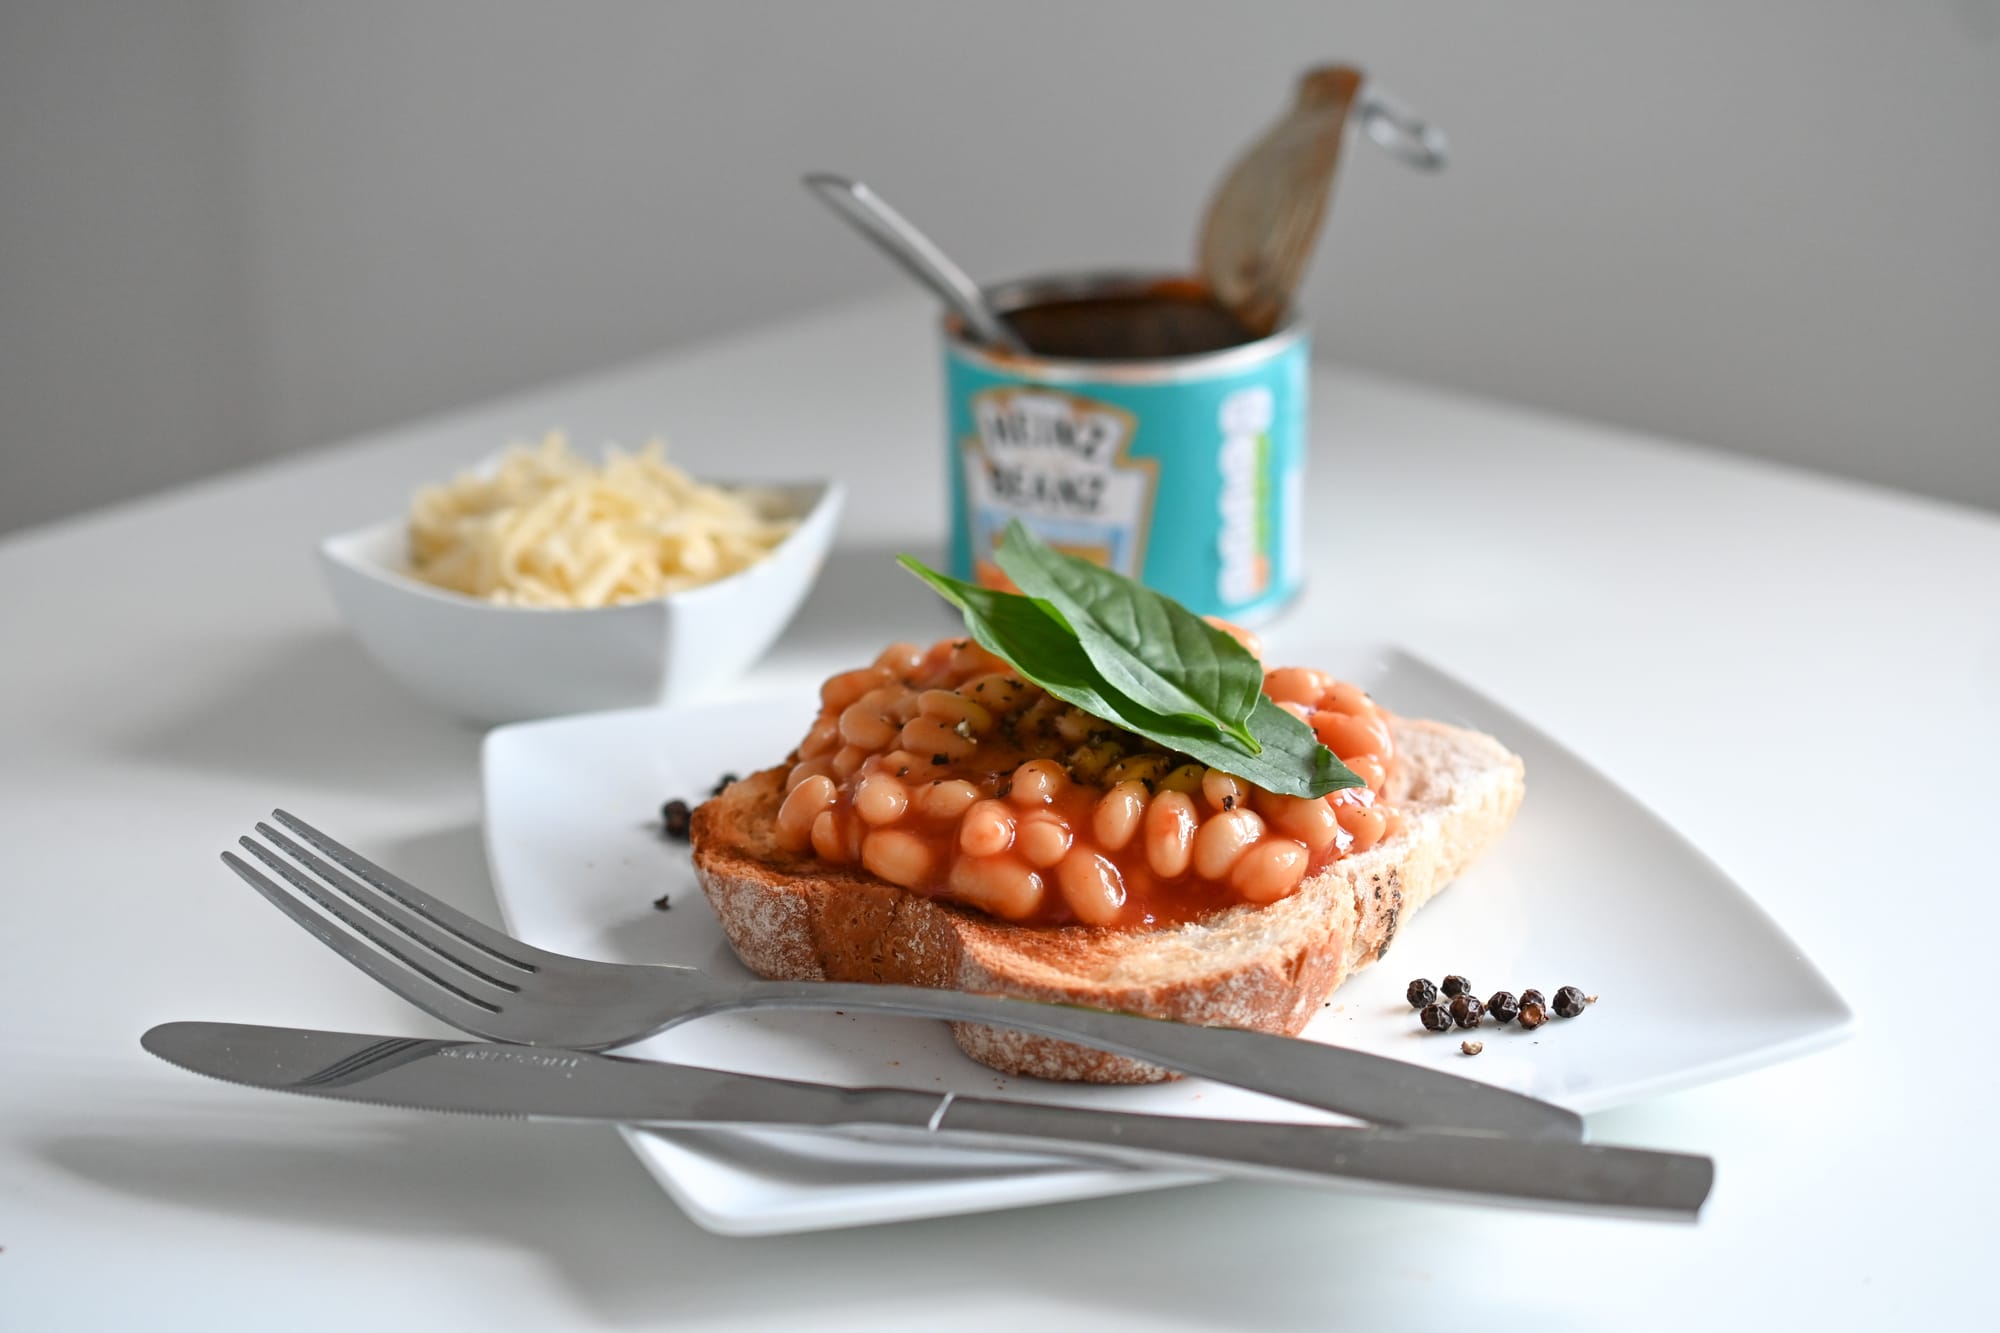 Beans on toast with some basil